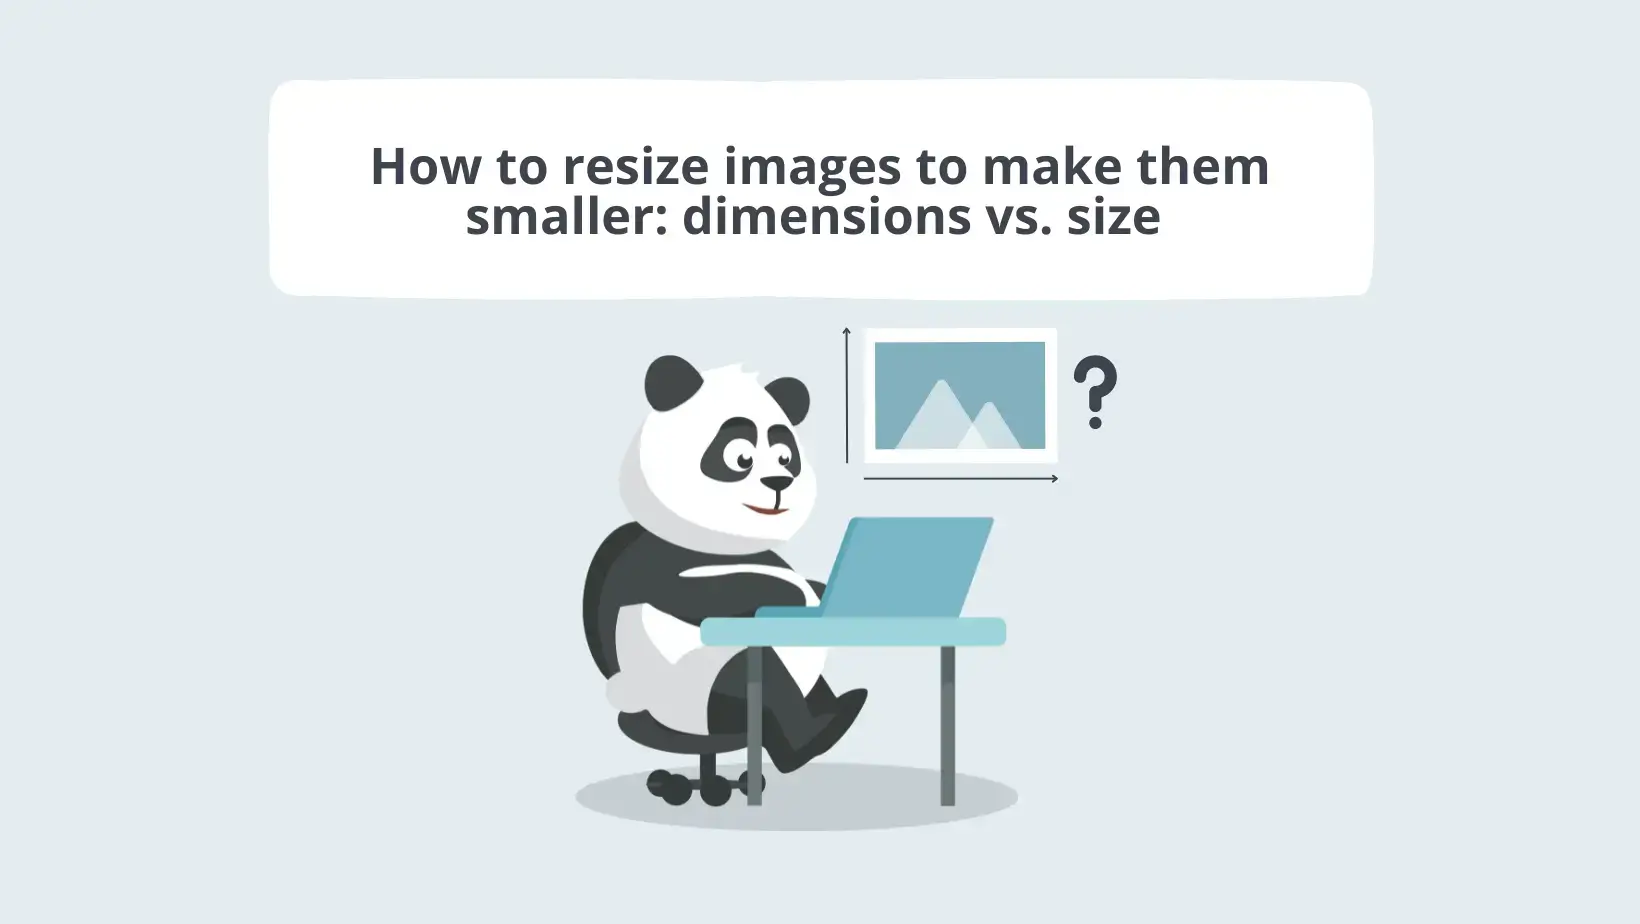 How to resize images to make them smaller for a faster website: dimensions vs. file size